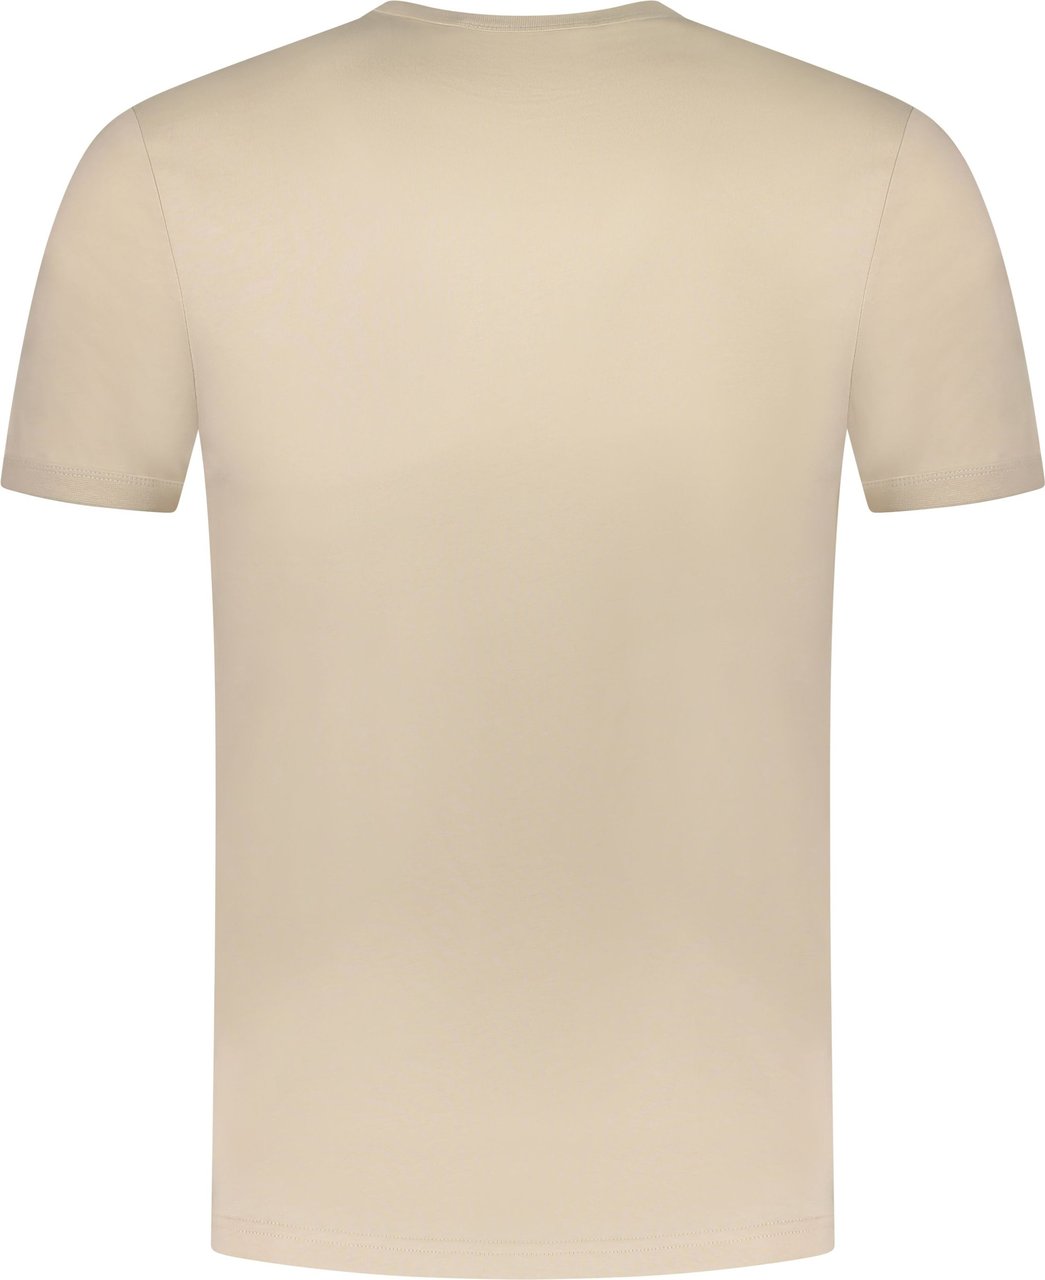 Fred Perry T-shirt Beige Beige